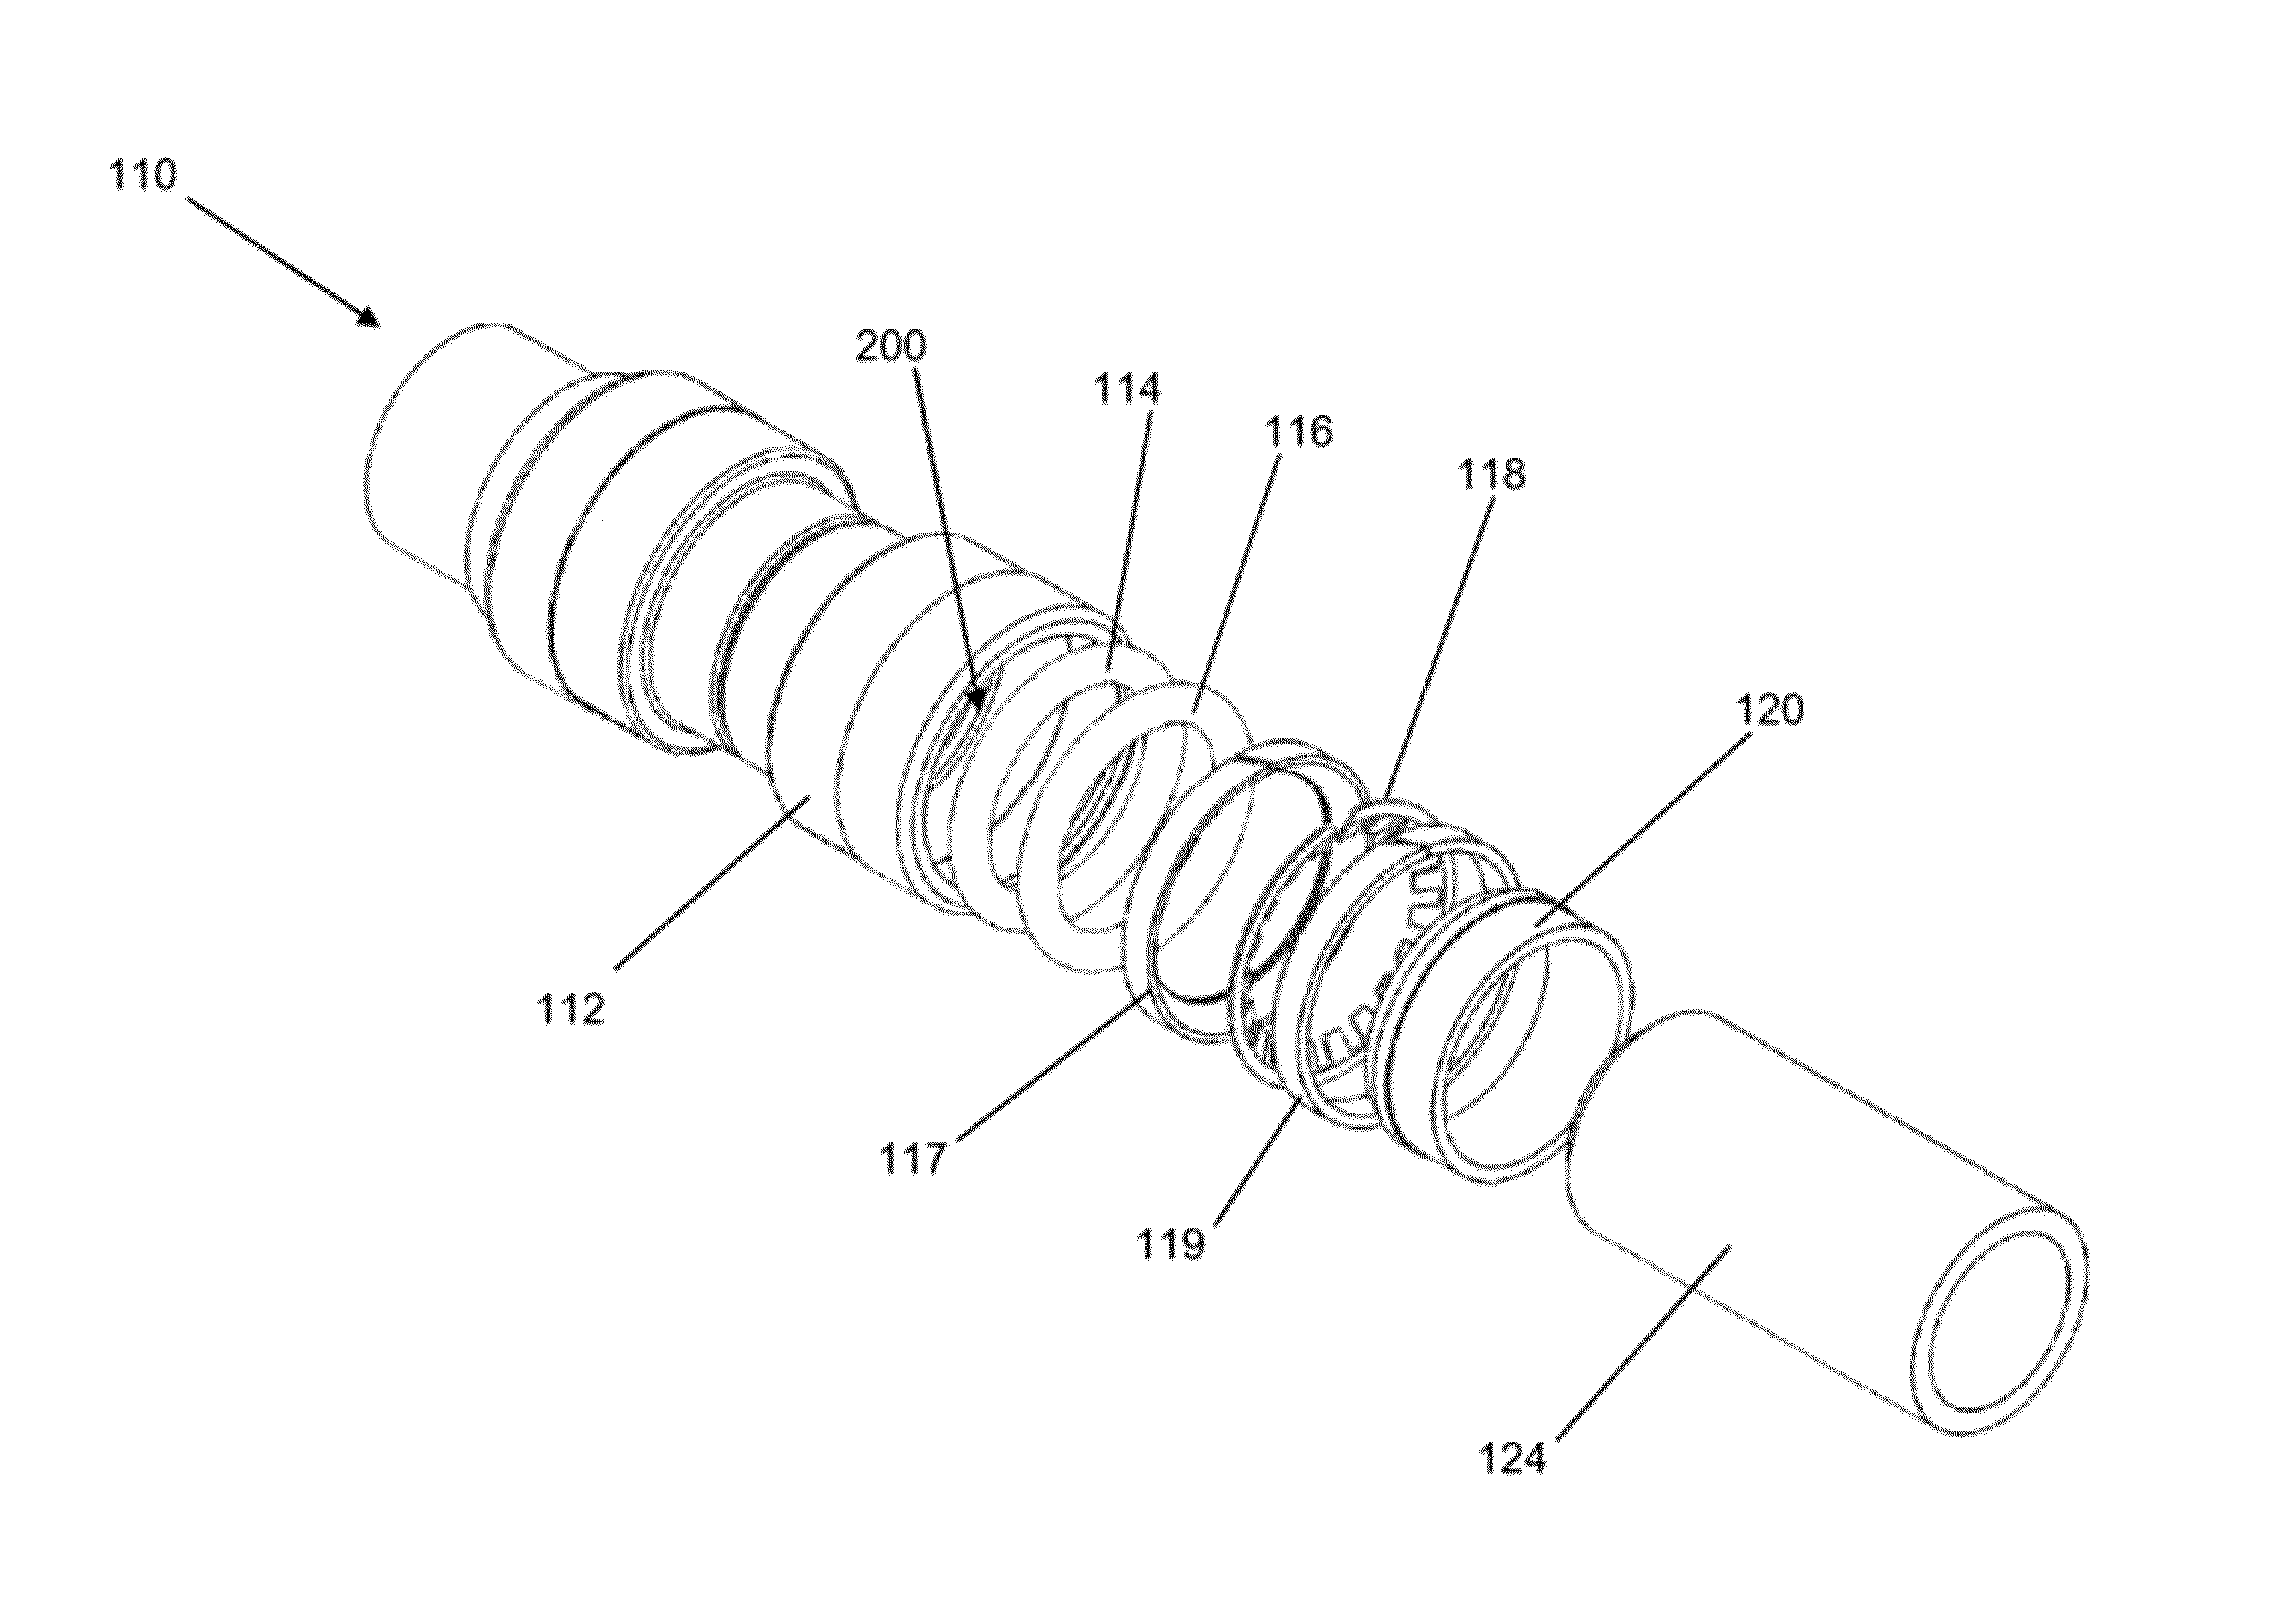 Push connect joint assembly, system and method